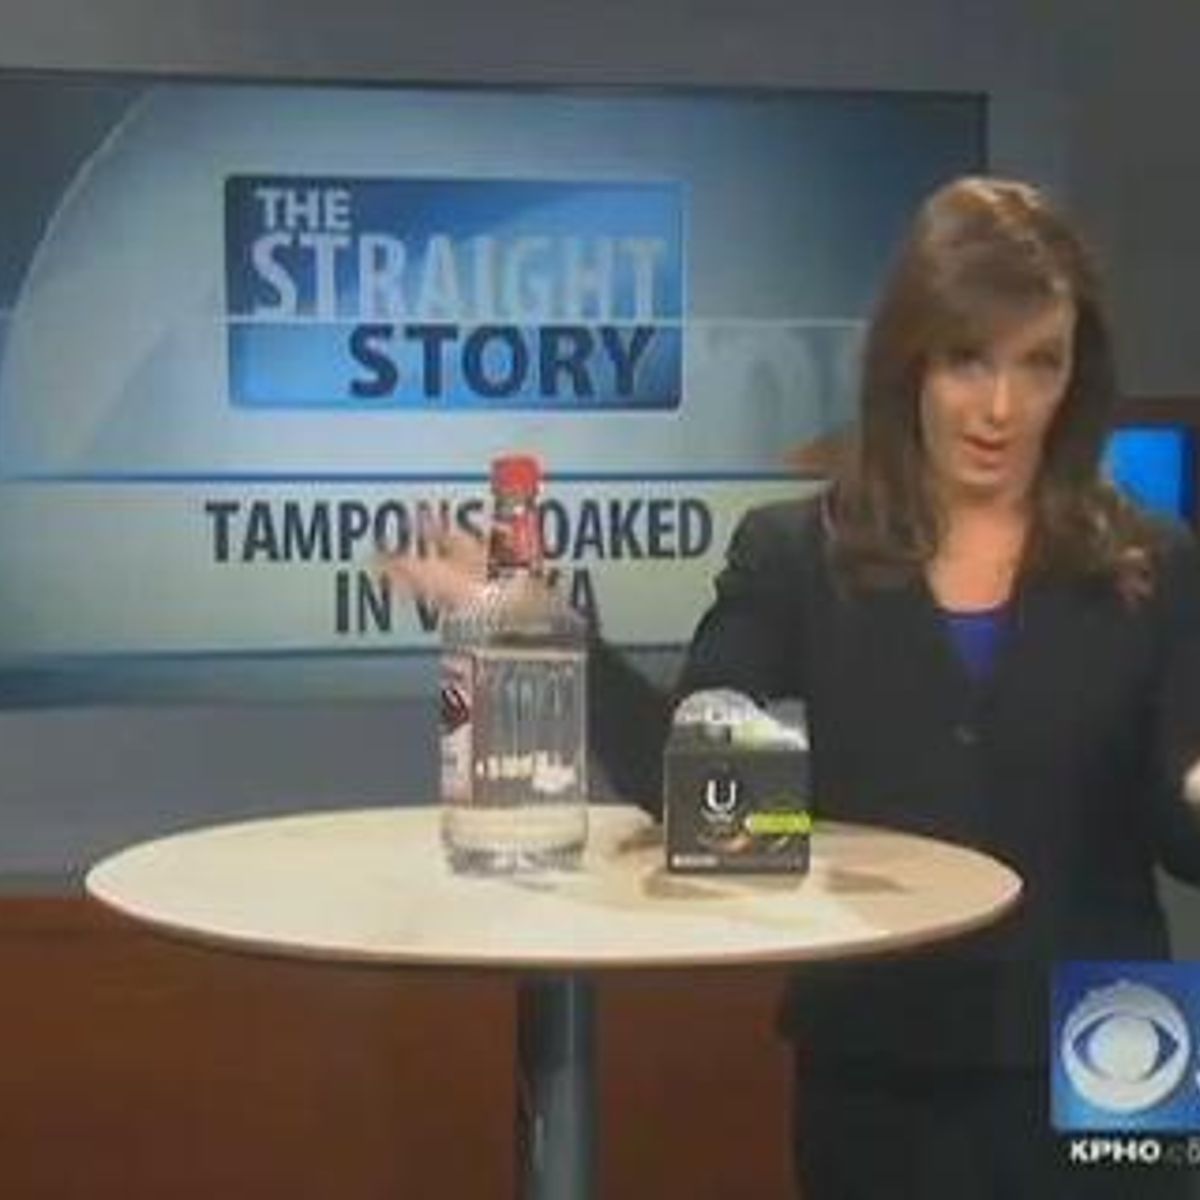 Women Using Vodka Tampons to Get Drunk? | Snopes.com